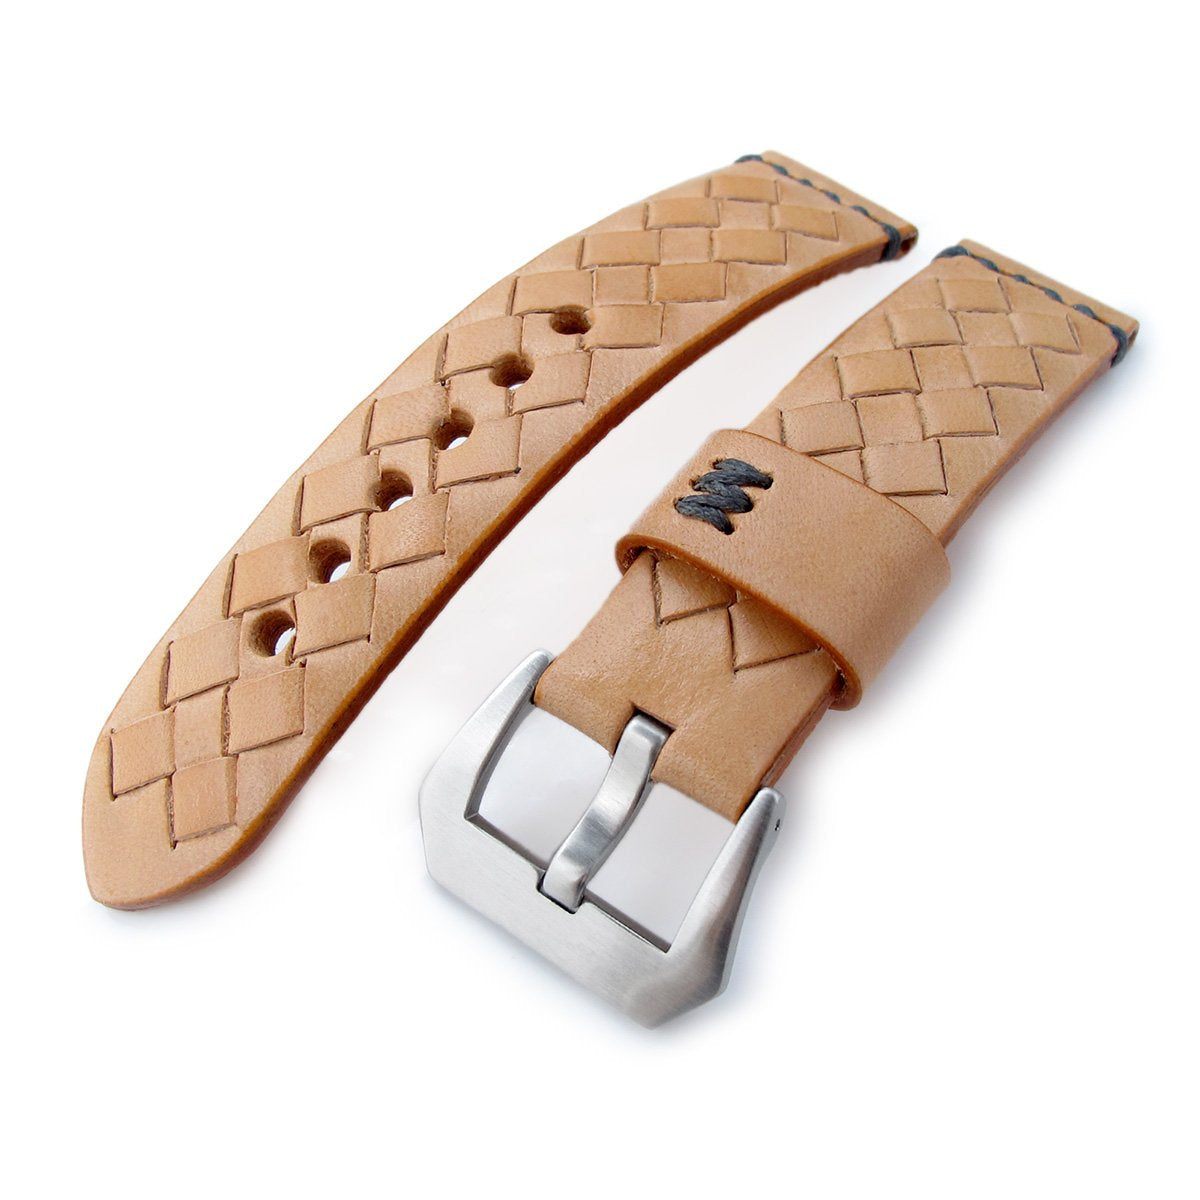 MiLTAT Zizz Collection 22mm Braided Calf Leather Watch Strap, LV